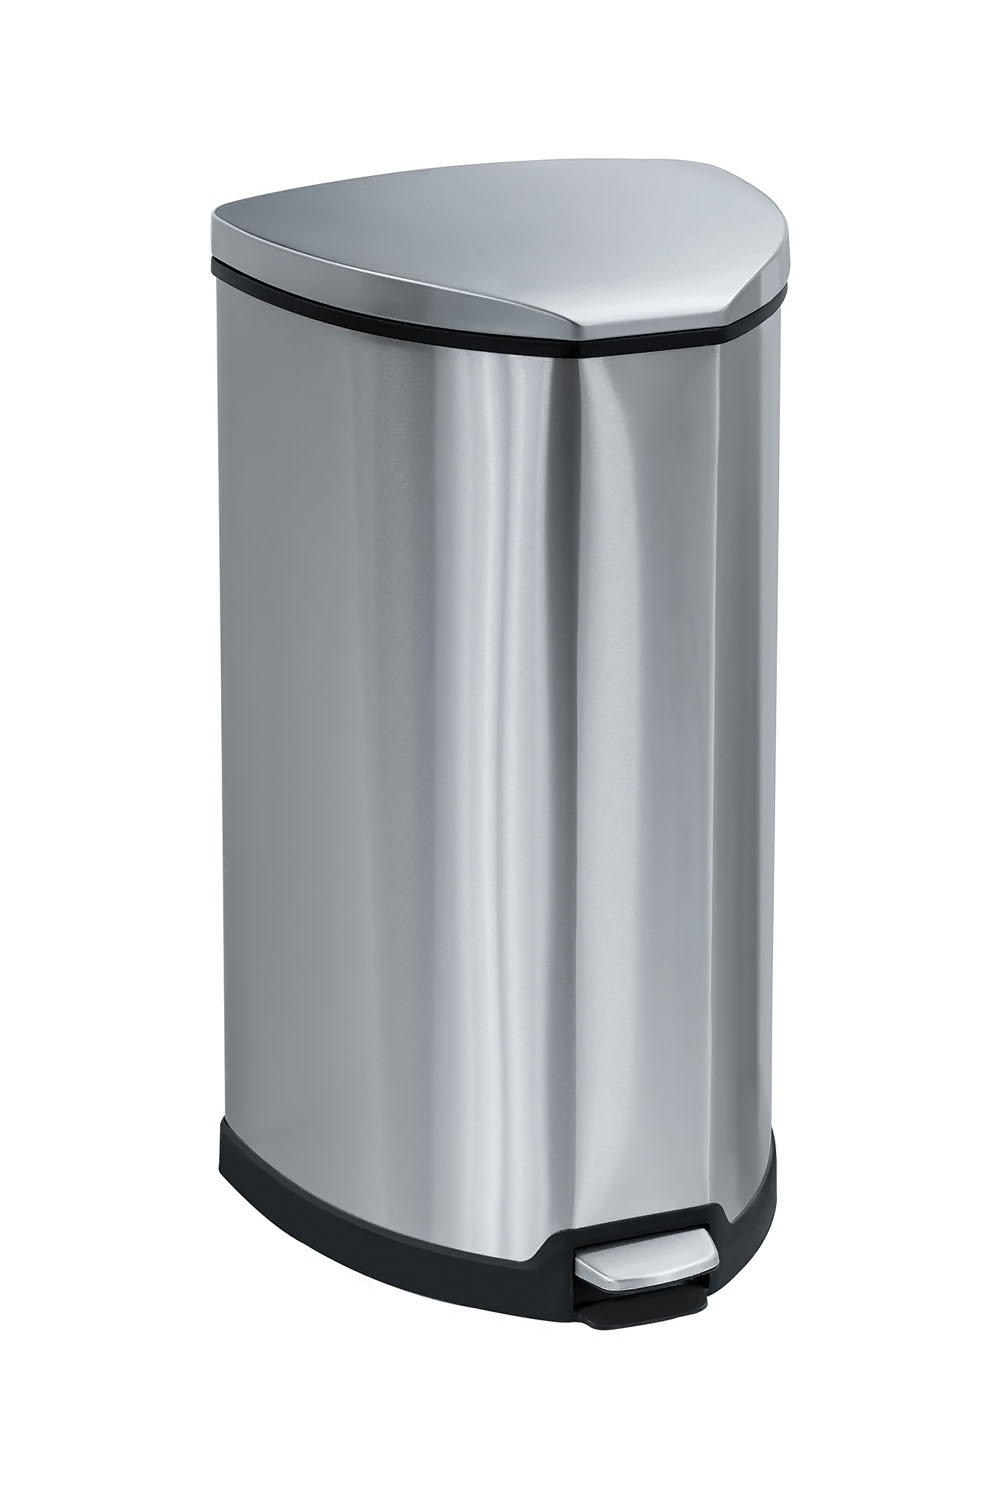 Safco Hands-free Step-on Stainless Receptacle - 10 gal Capacity - 27" Height x 14" Width x 14" Depth - Stainless Steel - Stainle